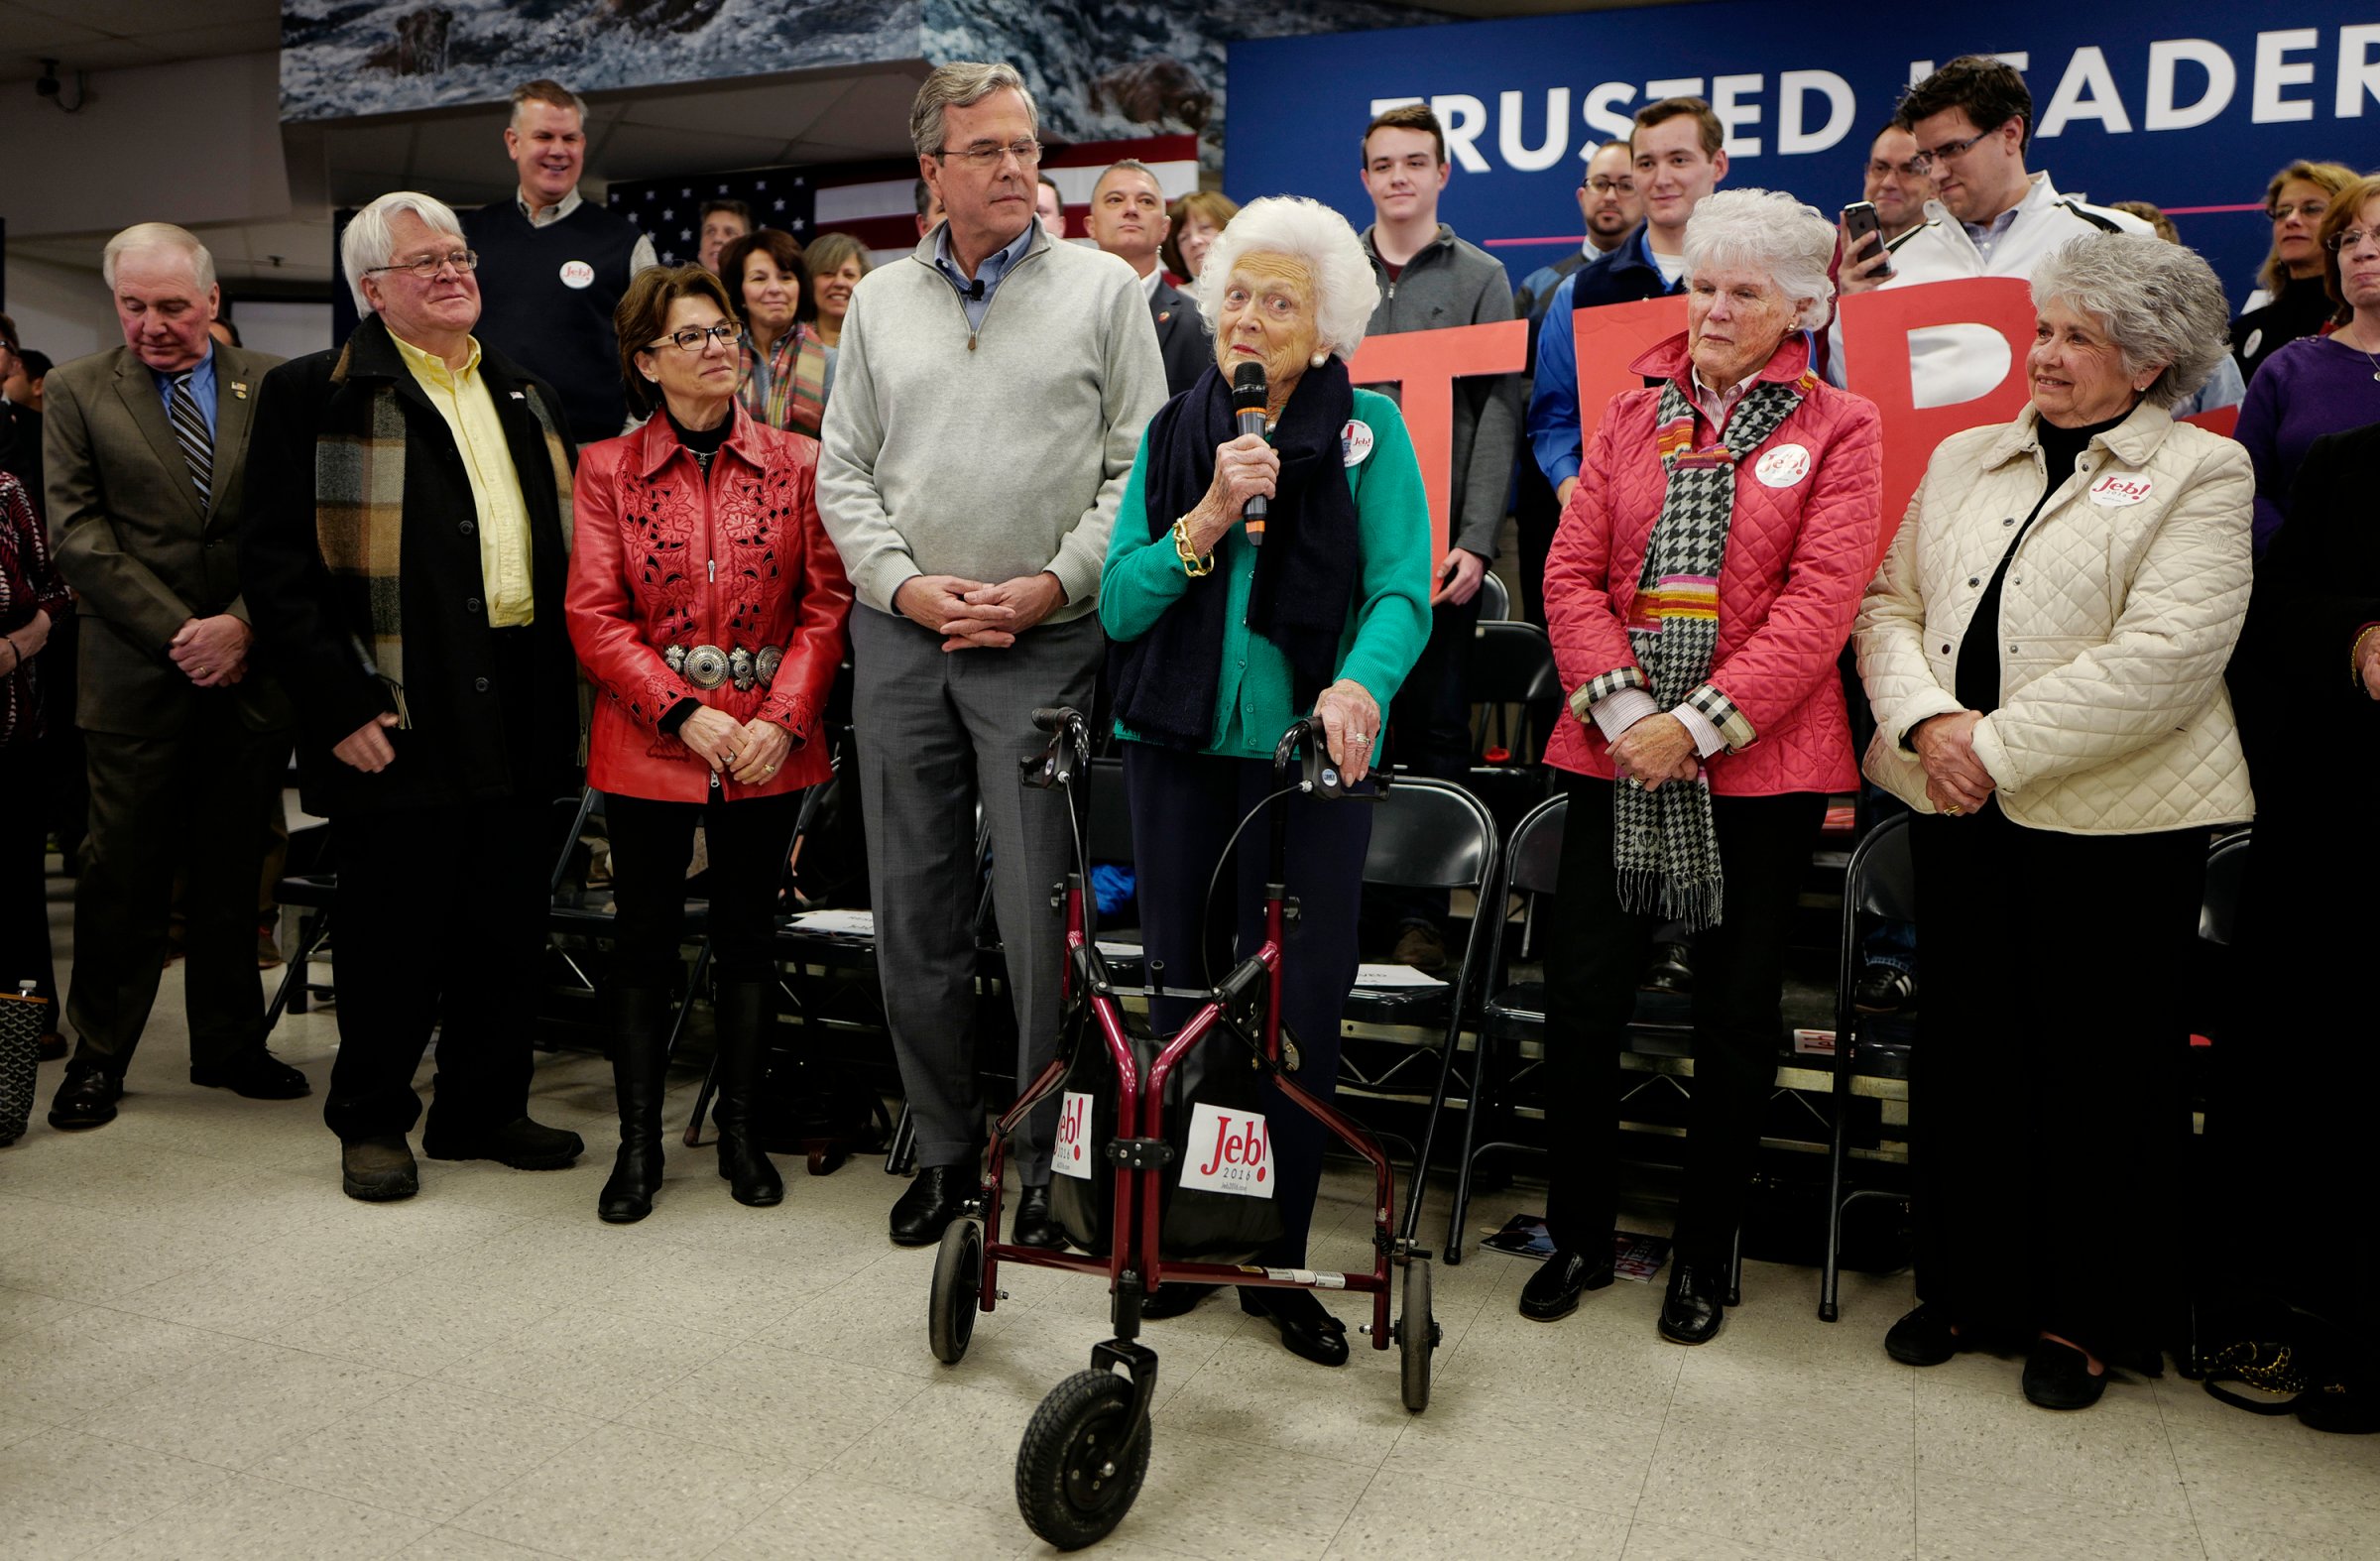 DERRY, NH - FEBRUARY 4: Republican presidential candidate Governor Jeb Bush is introduced by his mother Barbara Bush before holding a town hall meeting at West Running Brook Middle School in Derry, New Hampshire on February 4, 2016. (Photos by Charles Ommanney/The Washington Post)